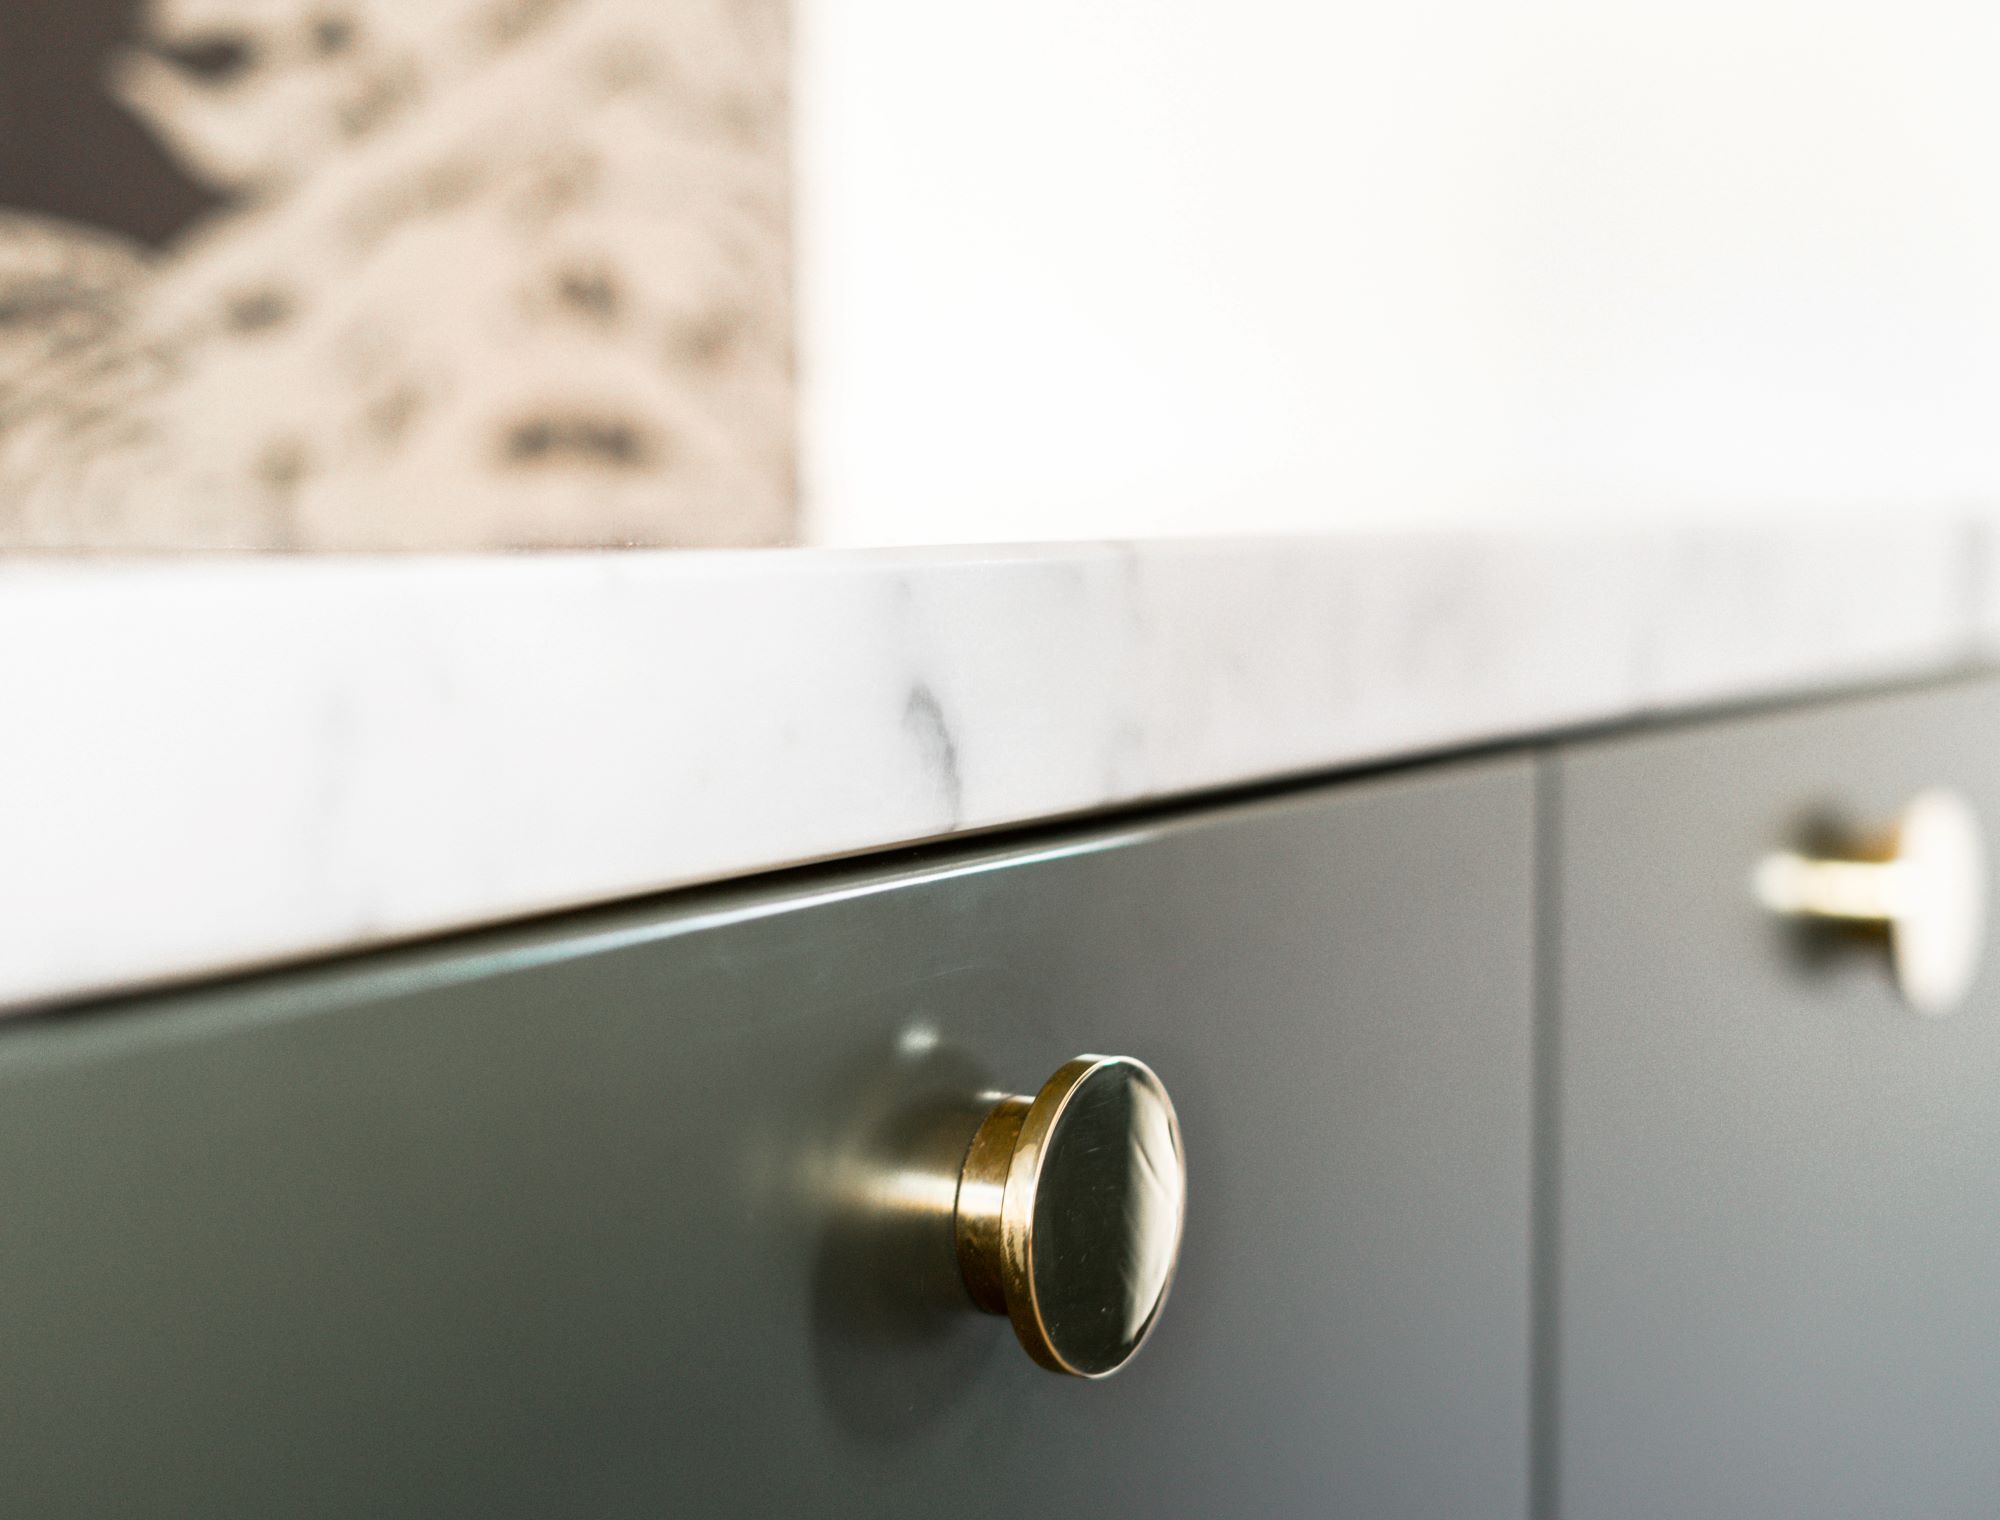 How to Install Cabinet Hardware